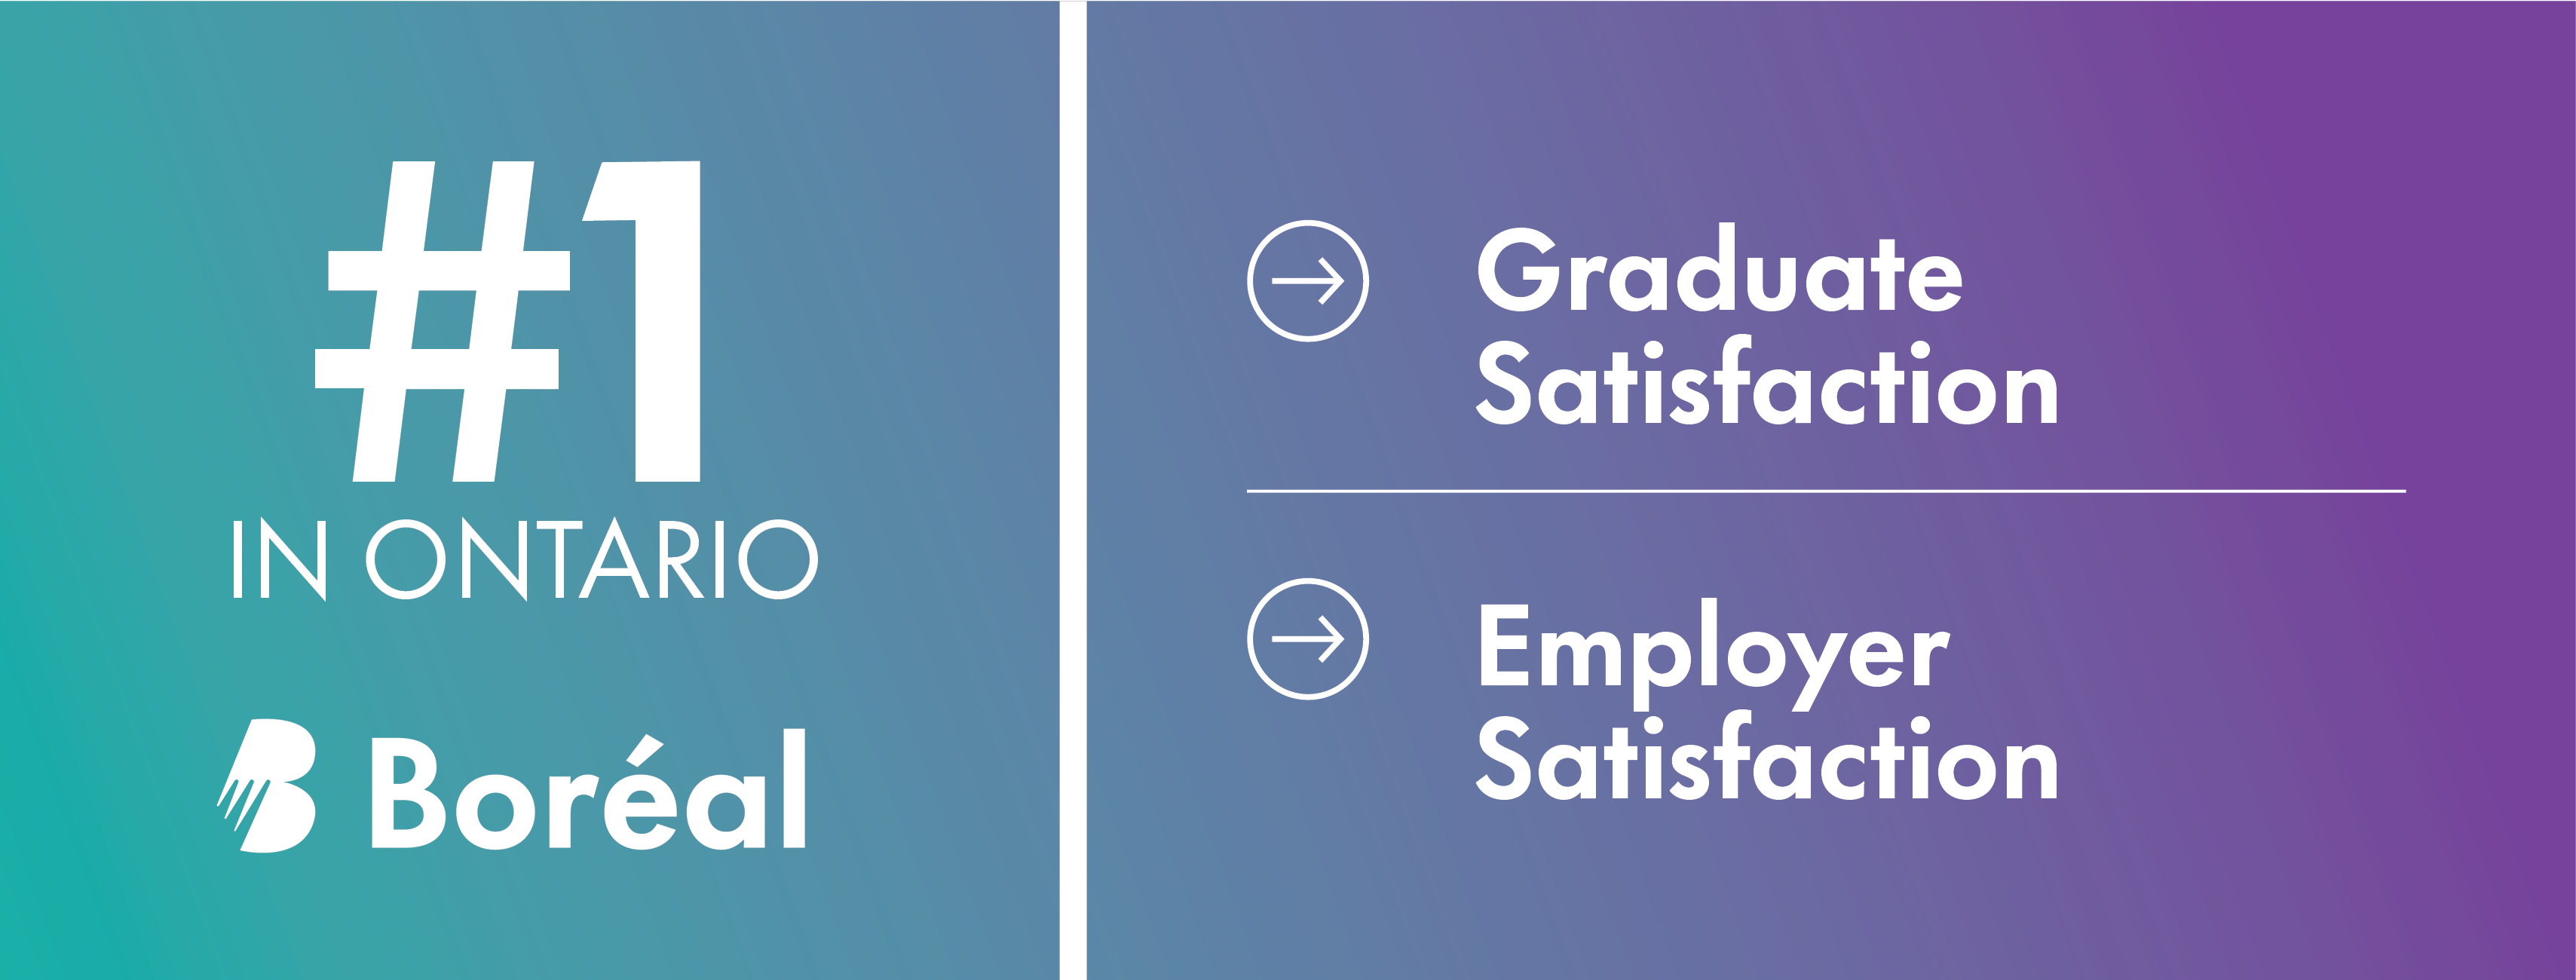 Once again, the performance indicators released by Colleges Ontario and commissioned by the Ministry of Colleges and Universities place Boréal at the top of two of the four categories assessed annually.